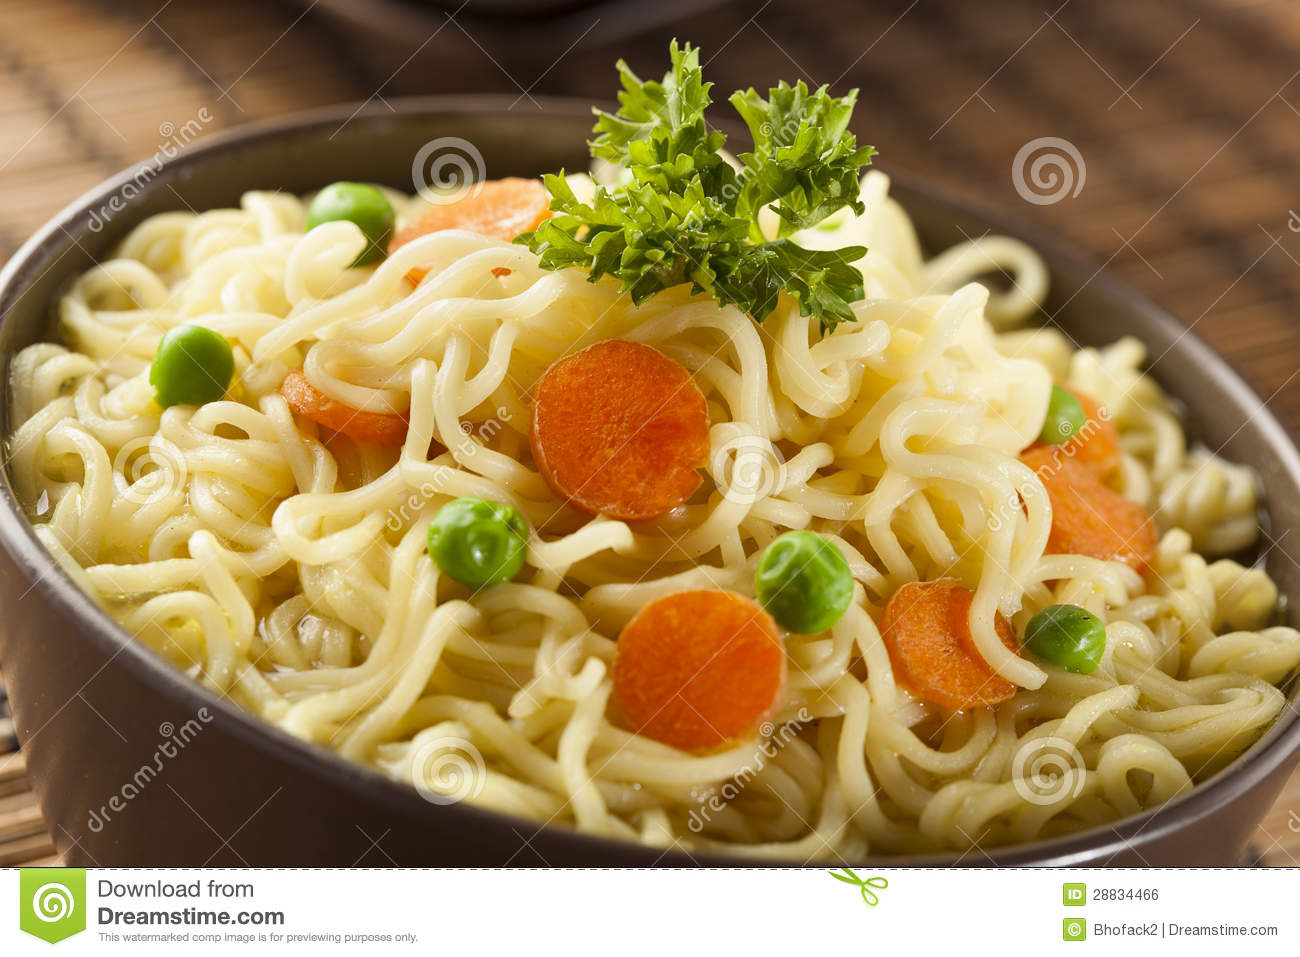 Homemade Quick Ramen Noodles Royalty Free Stock Image   Image